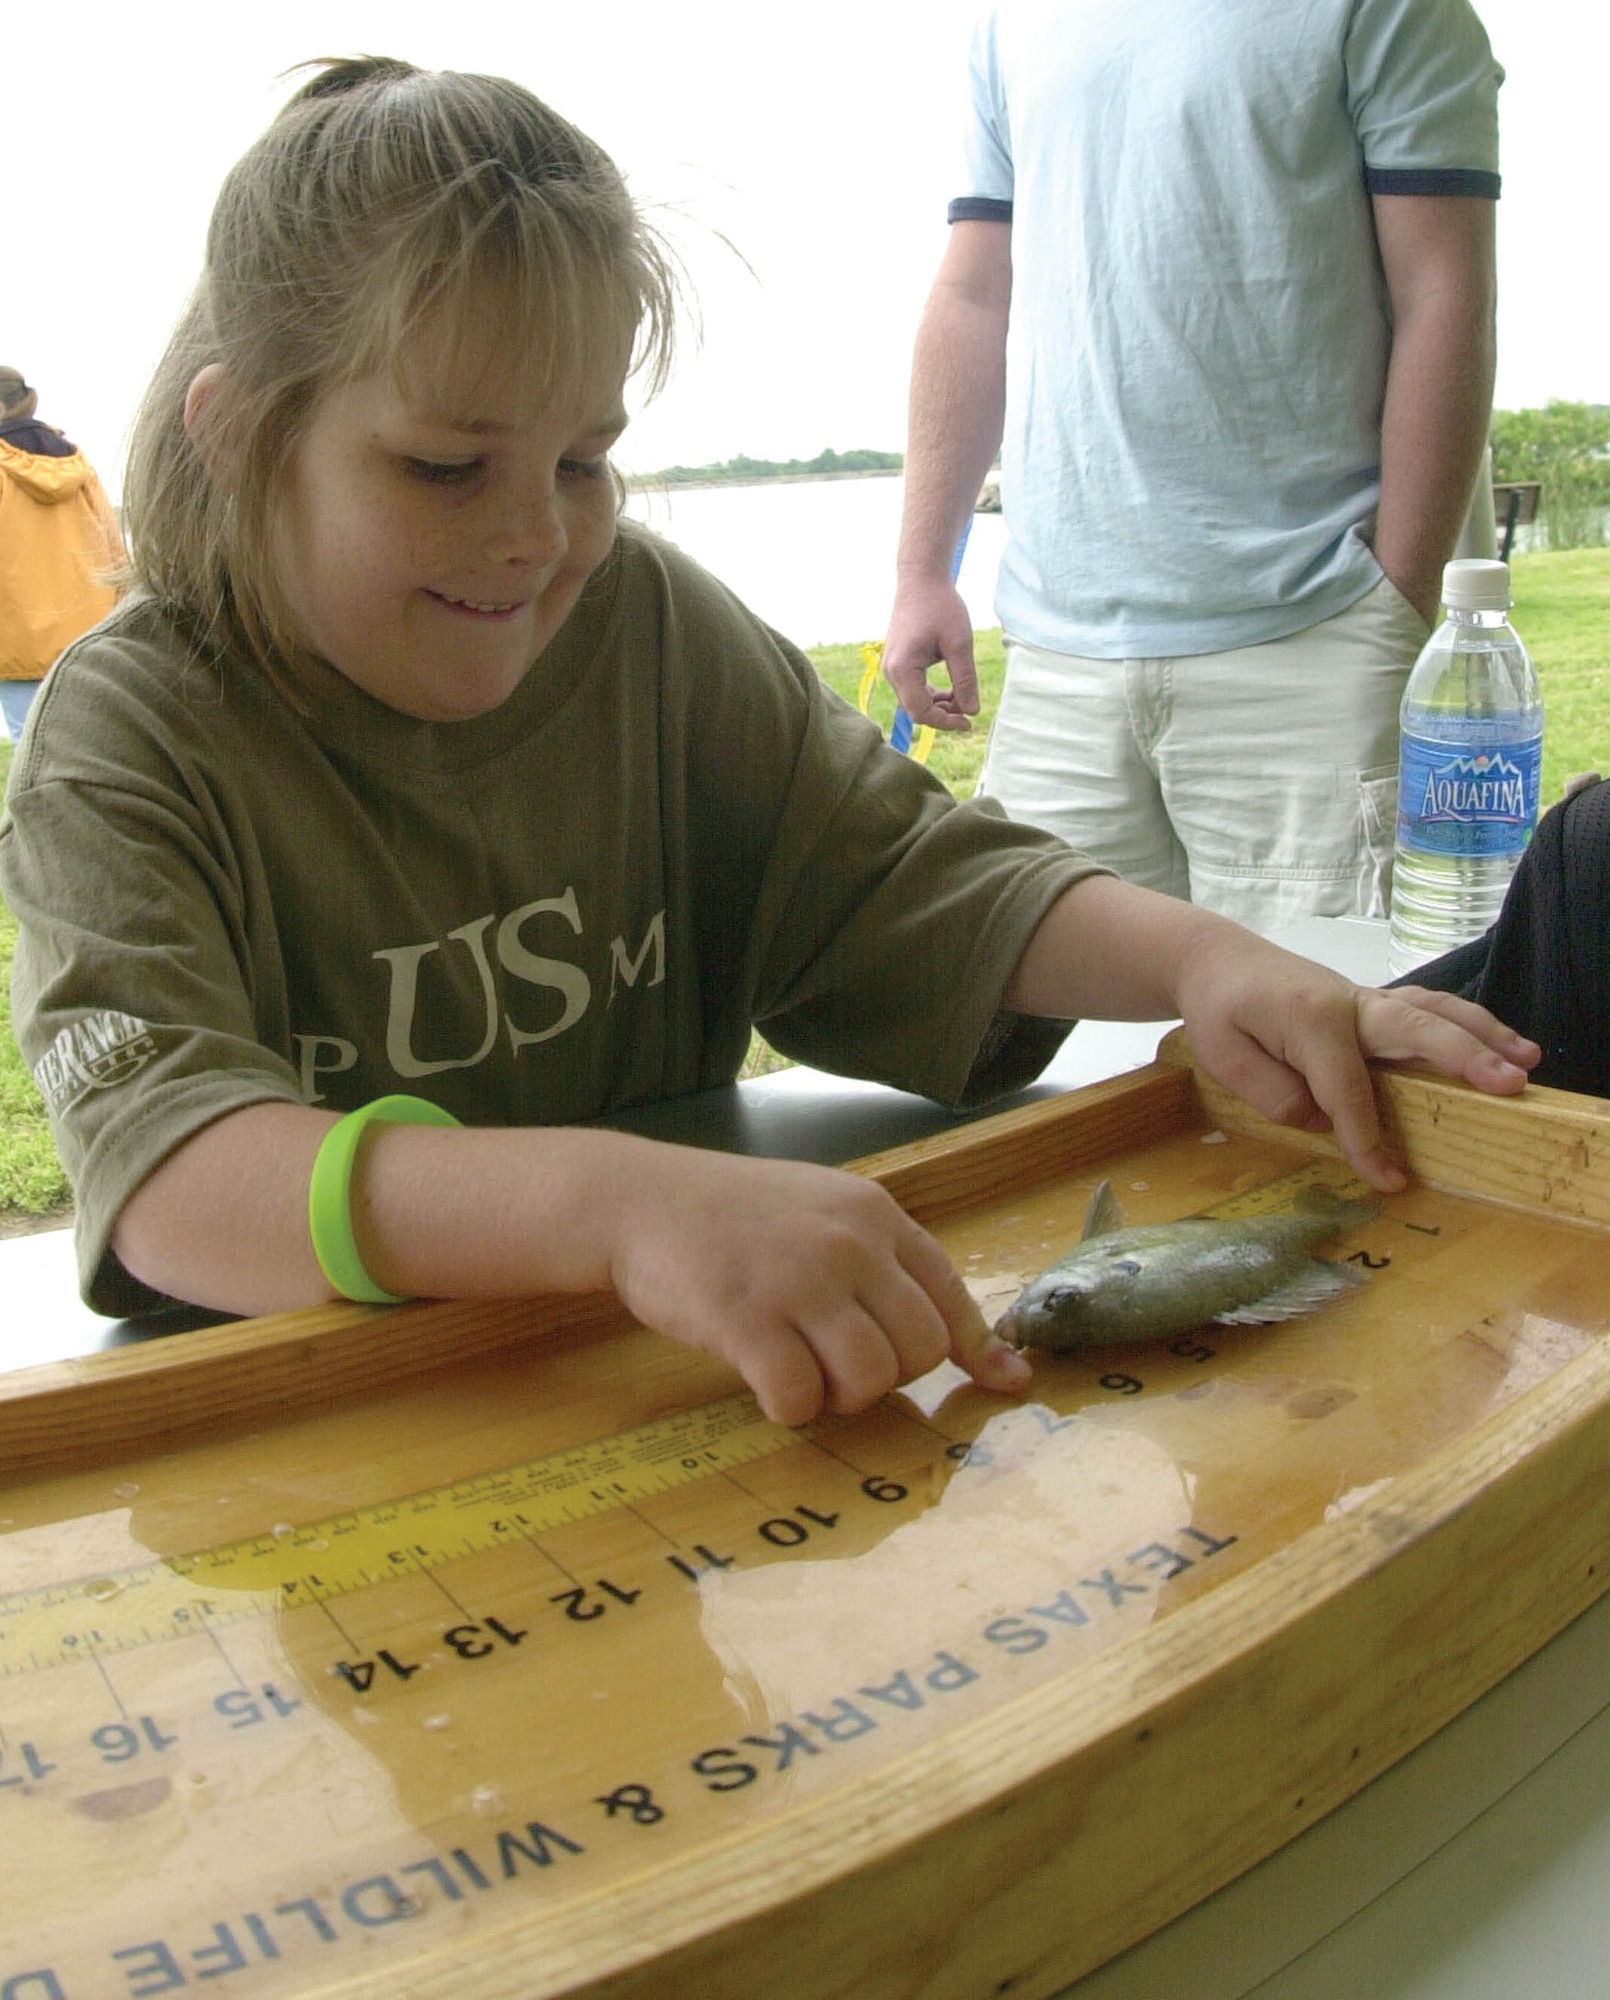 Seven-year-old Melissa Noble measures her latest catch, a 6-inch sunfish. Melissa was one of dozens of young anglers who competed in the 2007 America’s Armed Forces Kids’ Fishing Derby Saturday at the Goodfellow Recreation Camp at Lake Nasworthy. (U.S. Air Force photo by Airman 1st Class Luis Loza Gutierrez).